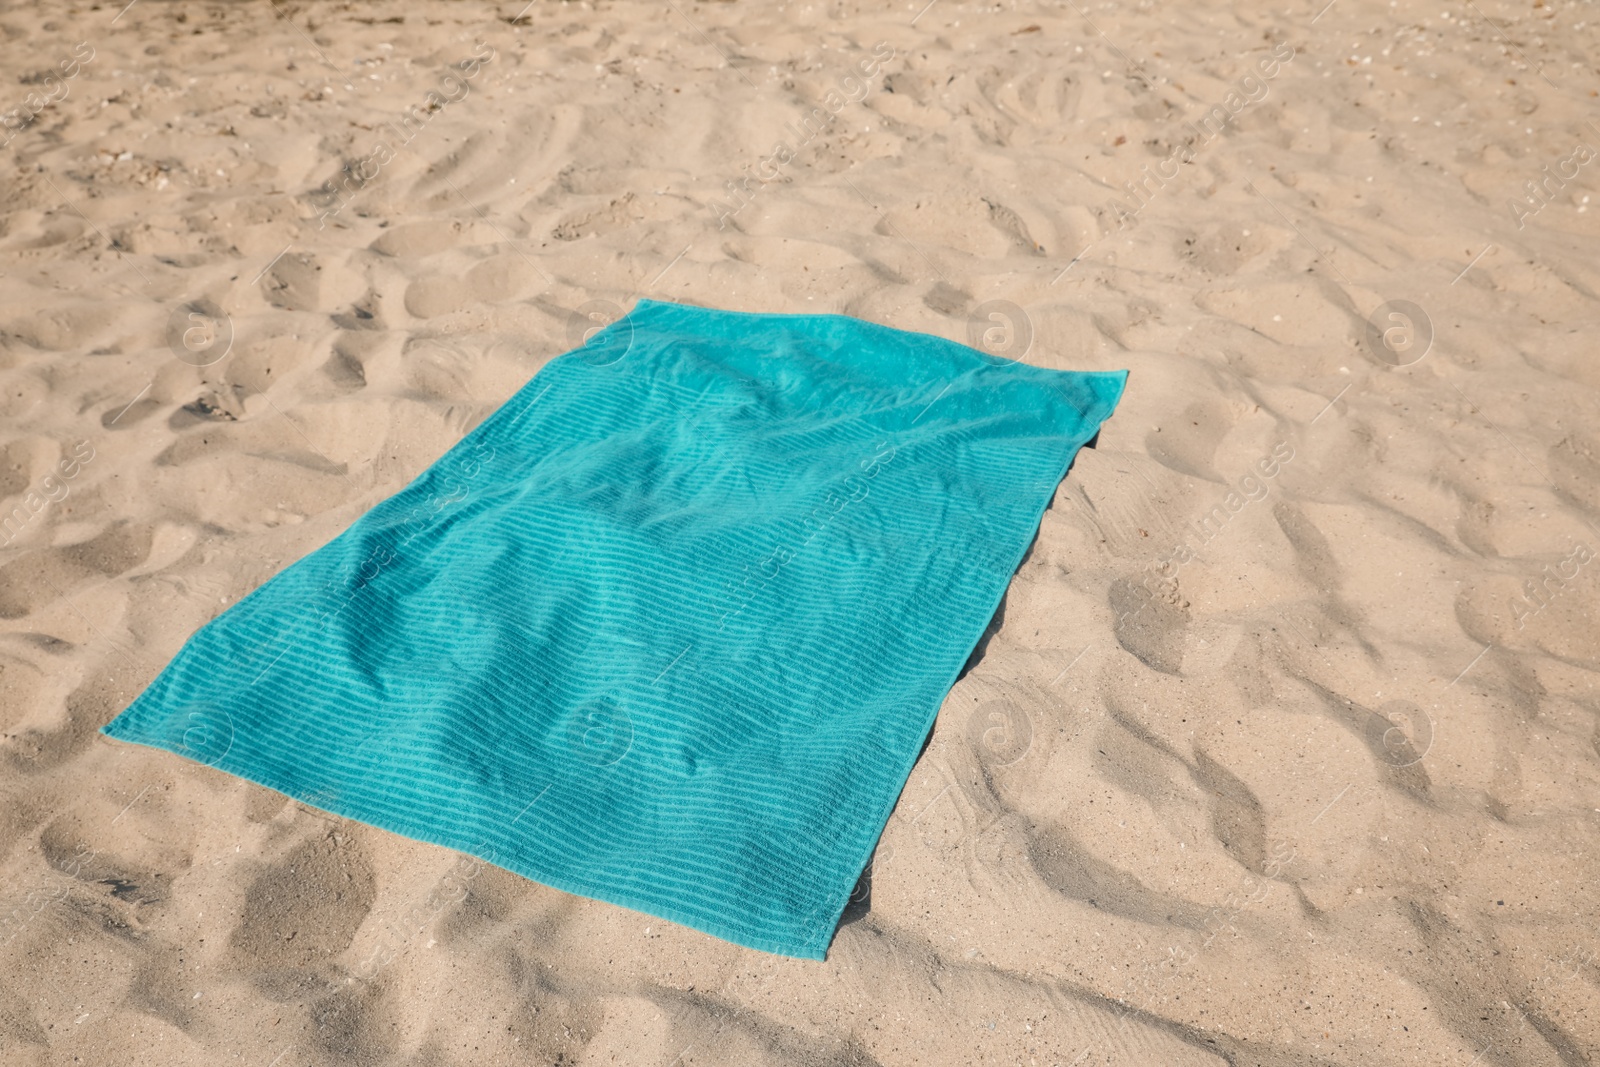 Photo of Turquoise soft beach towel on sunlit sand